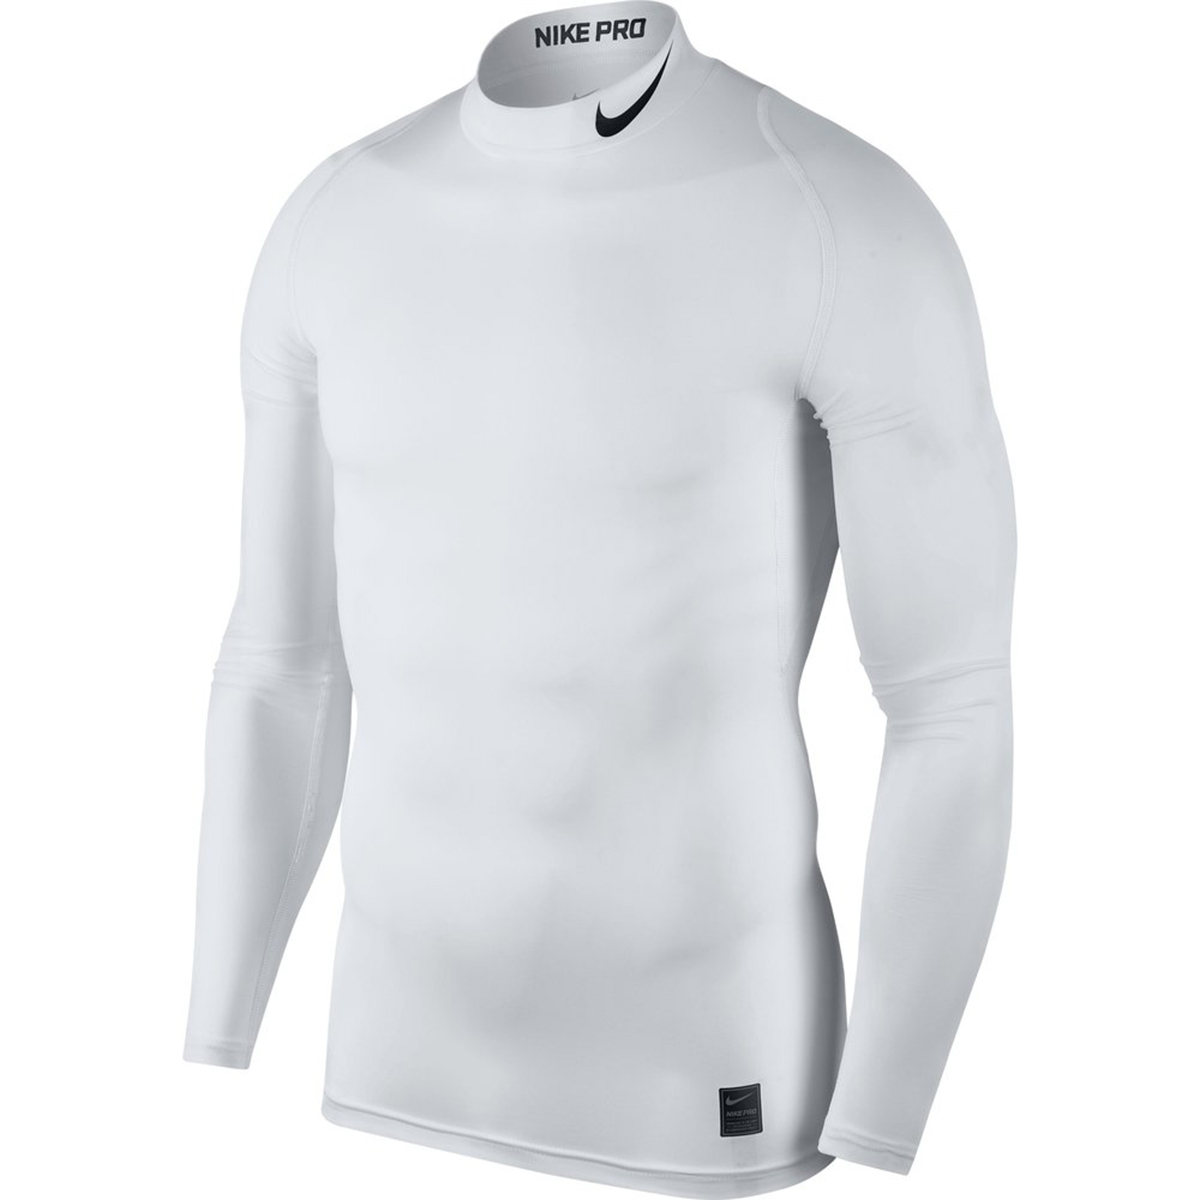 NIKE Herren Pro Dry Fit COMPRESSION Langarm Funktionsshirt weiss